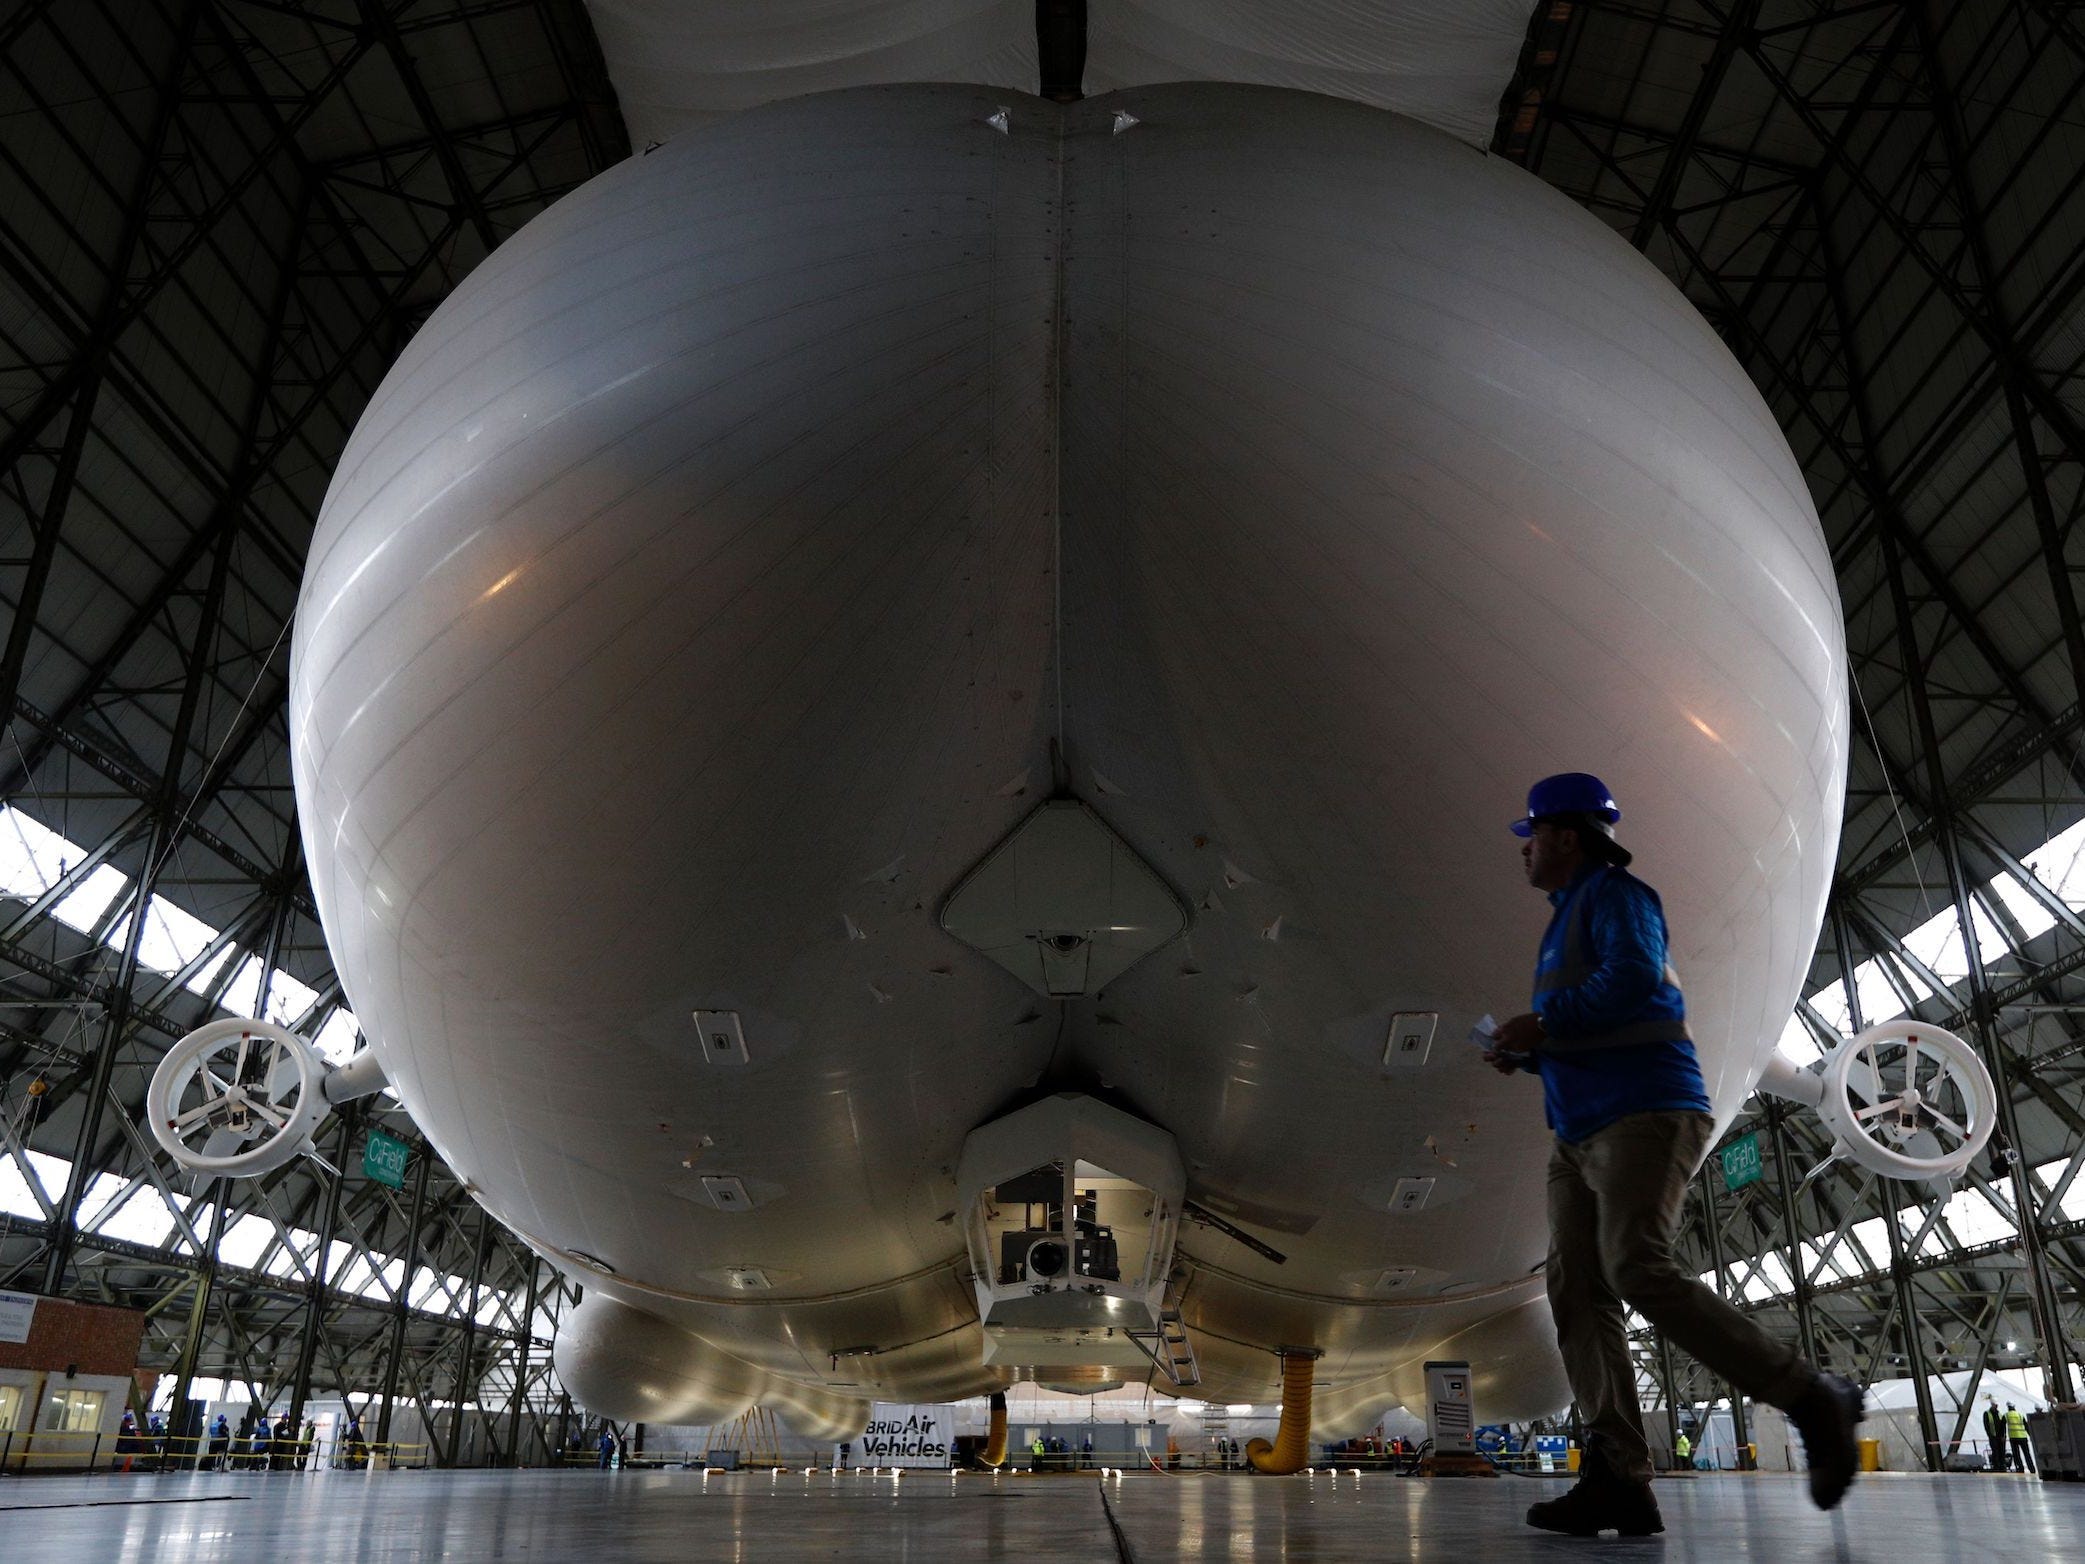 the exterior of the Airlander 10 in a hangar